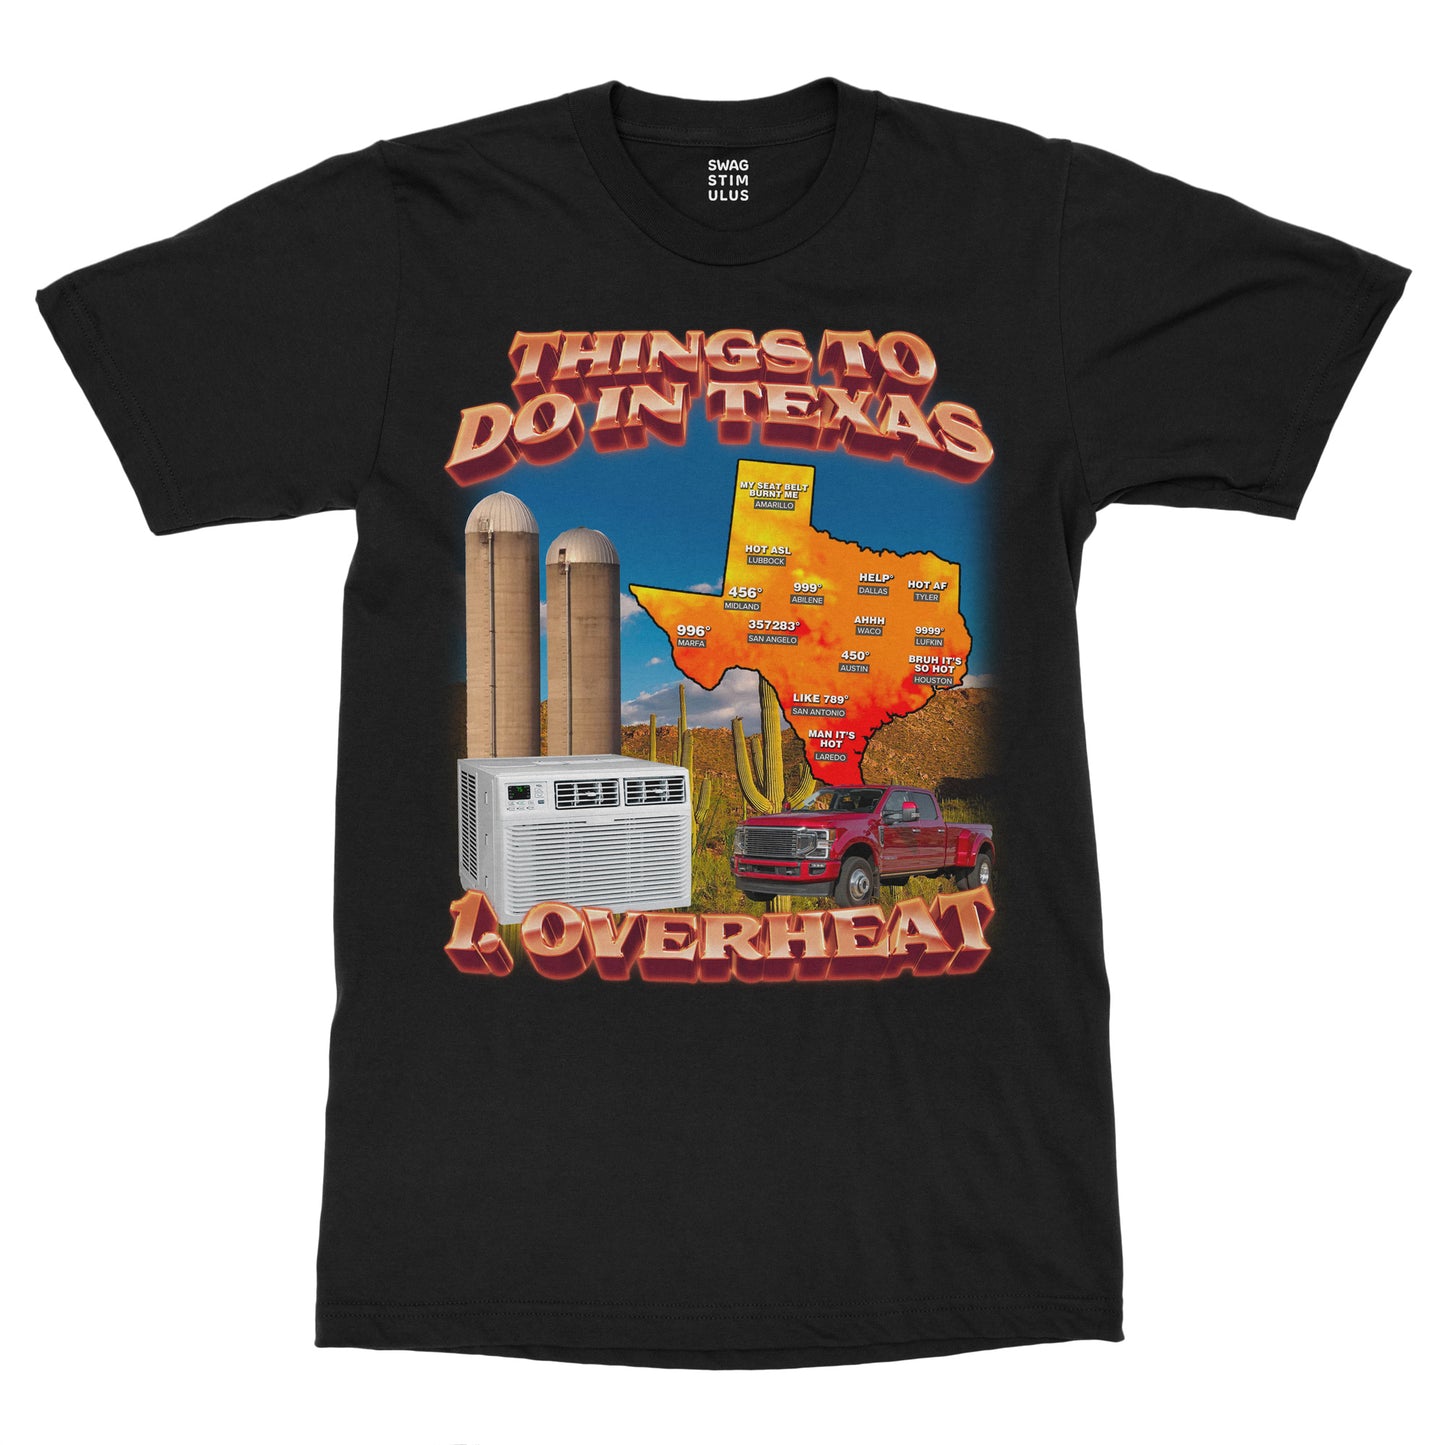 Things to do in Texas T-Shirt